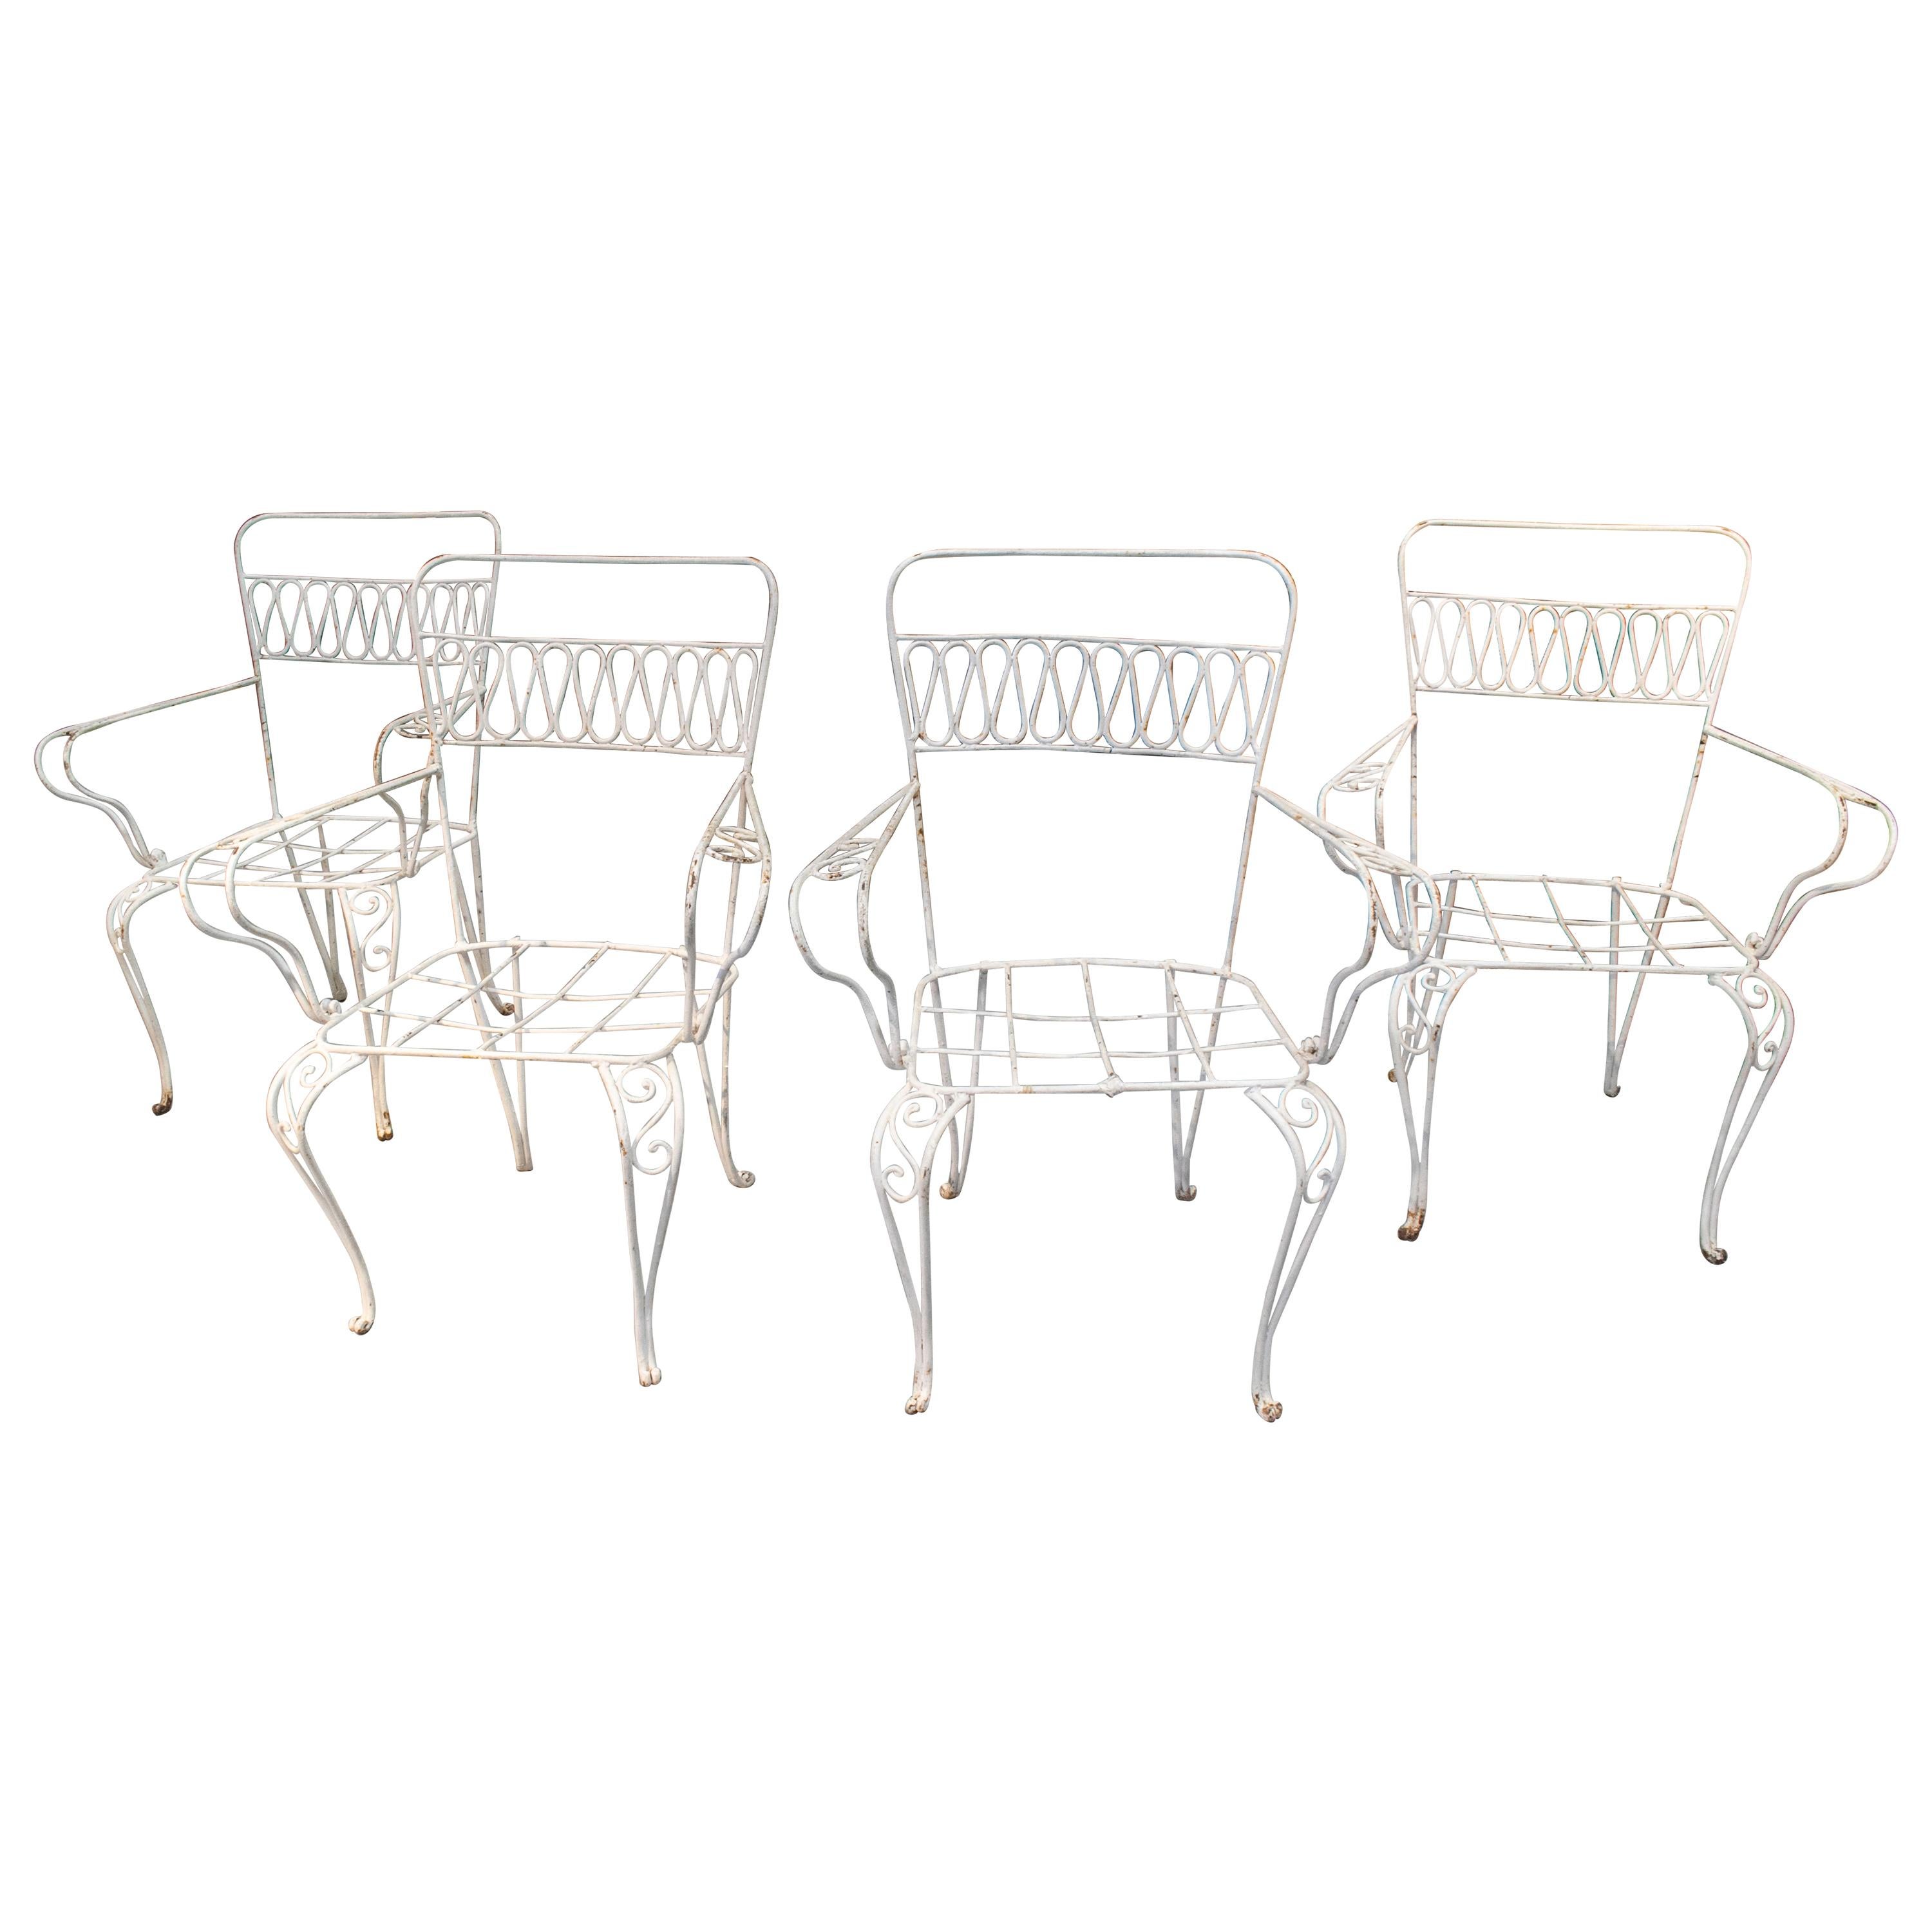 1970s Set of Four Spanish White Painted Iron Garden Chairs